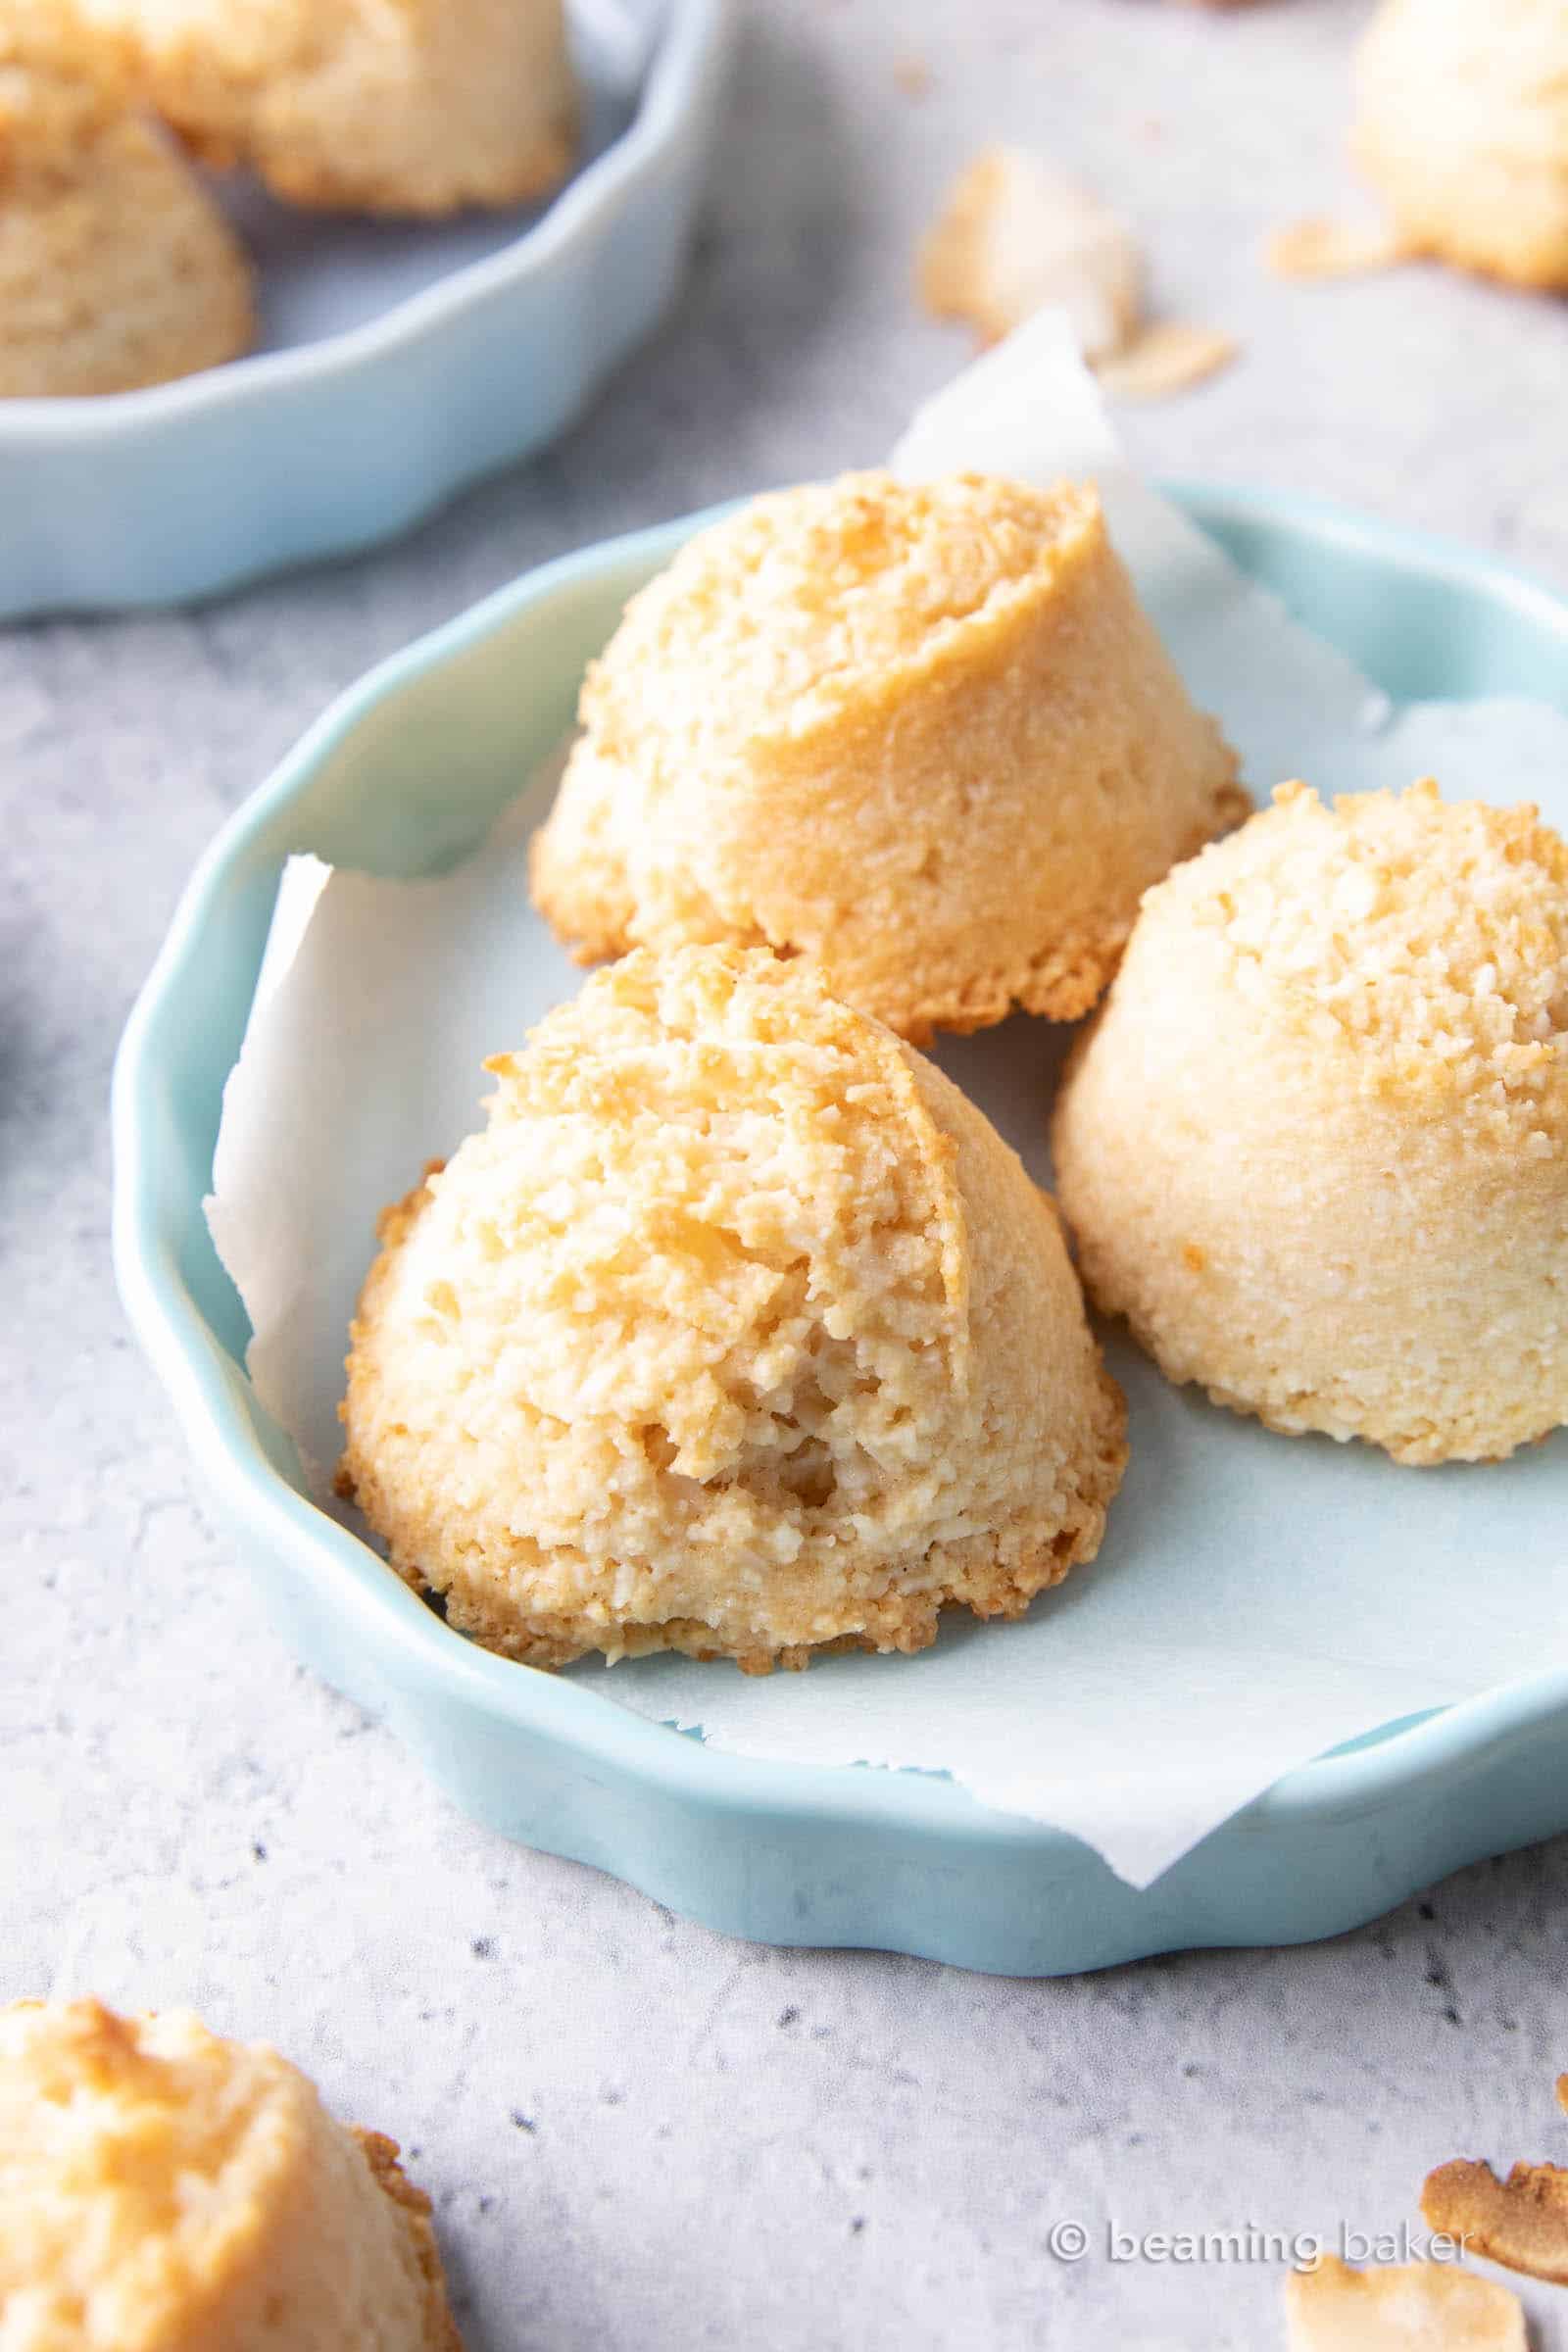 Gluten Free Coconut Macaroons Recipe: this easy gluten free macaroons recipe yields soft & chewy coconut cookies with a crispy exterior! Vegan, Paleo, Dairy-Free, Egg-Free. #Coconut #Macaroons #GlutenFree #Cookies #Easter | Recipe at BeamingBaker.com